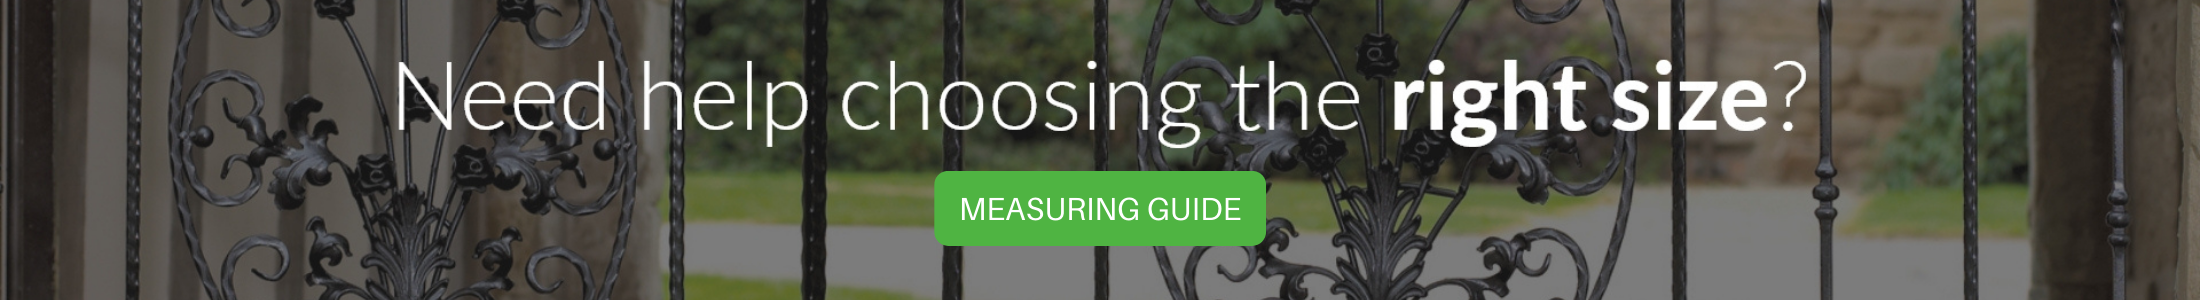 View the Stirling railings measuring guide - Click here for full details